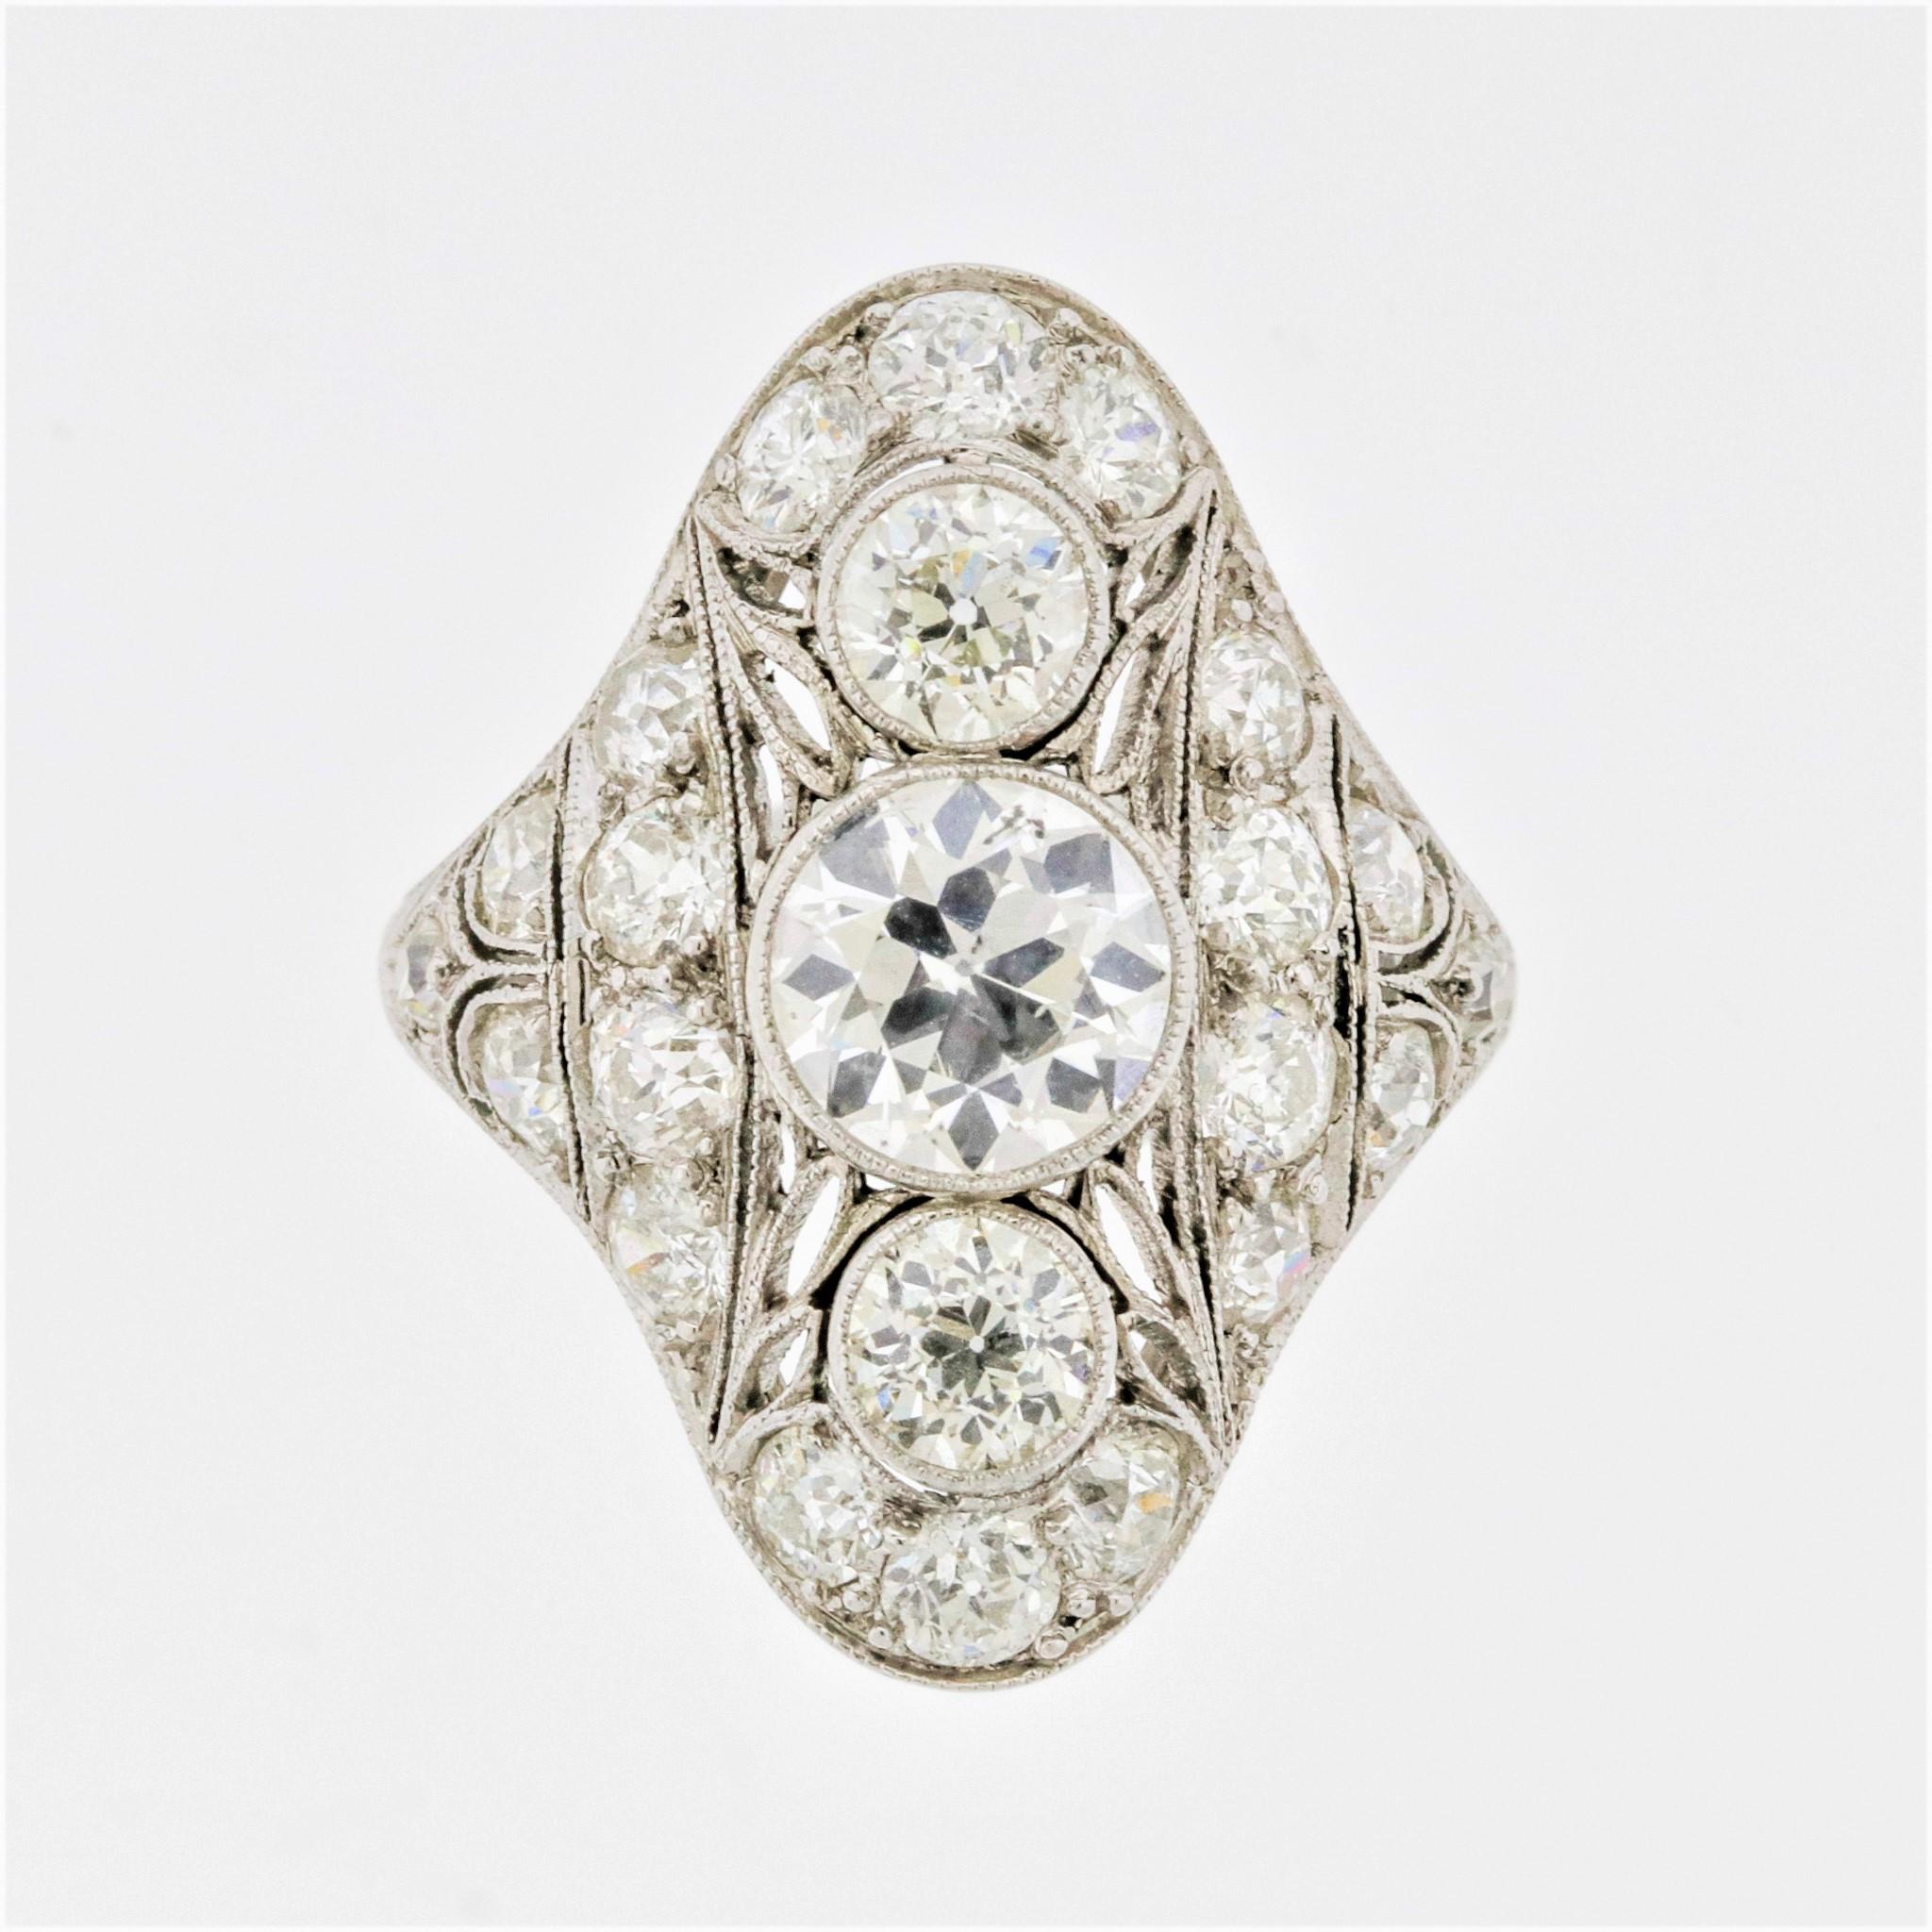 A lovely treasure from the Art Deco era, circa 1930. It features a 1.25 carat European-cut diamond in its center which is bezel set along with two other diamonds above and below it. They have detailed hand applied millgrain around the settings in